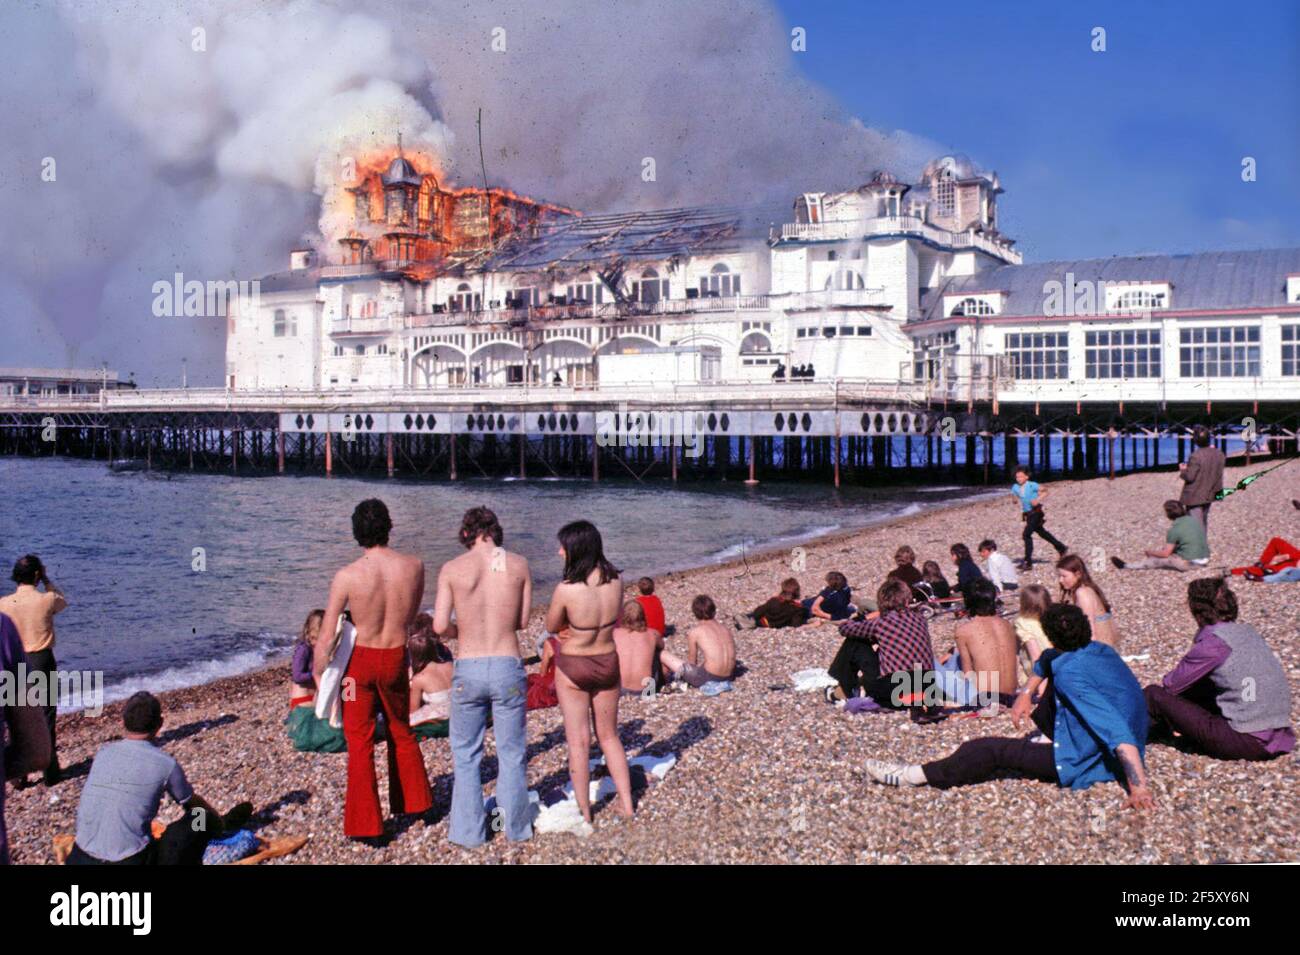 SOUTH PARADE PIER BURNS DOWN AFTER A FIRE DURING THE FILMING OF THE KEN RUSSELL FILM TOMMY. PIC MIKE WALKER, PORTSMOUTH.1974 Stock Photo